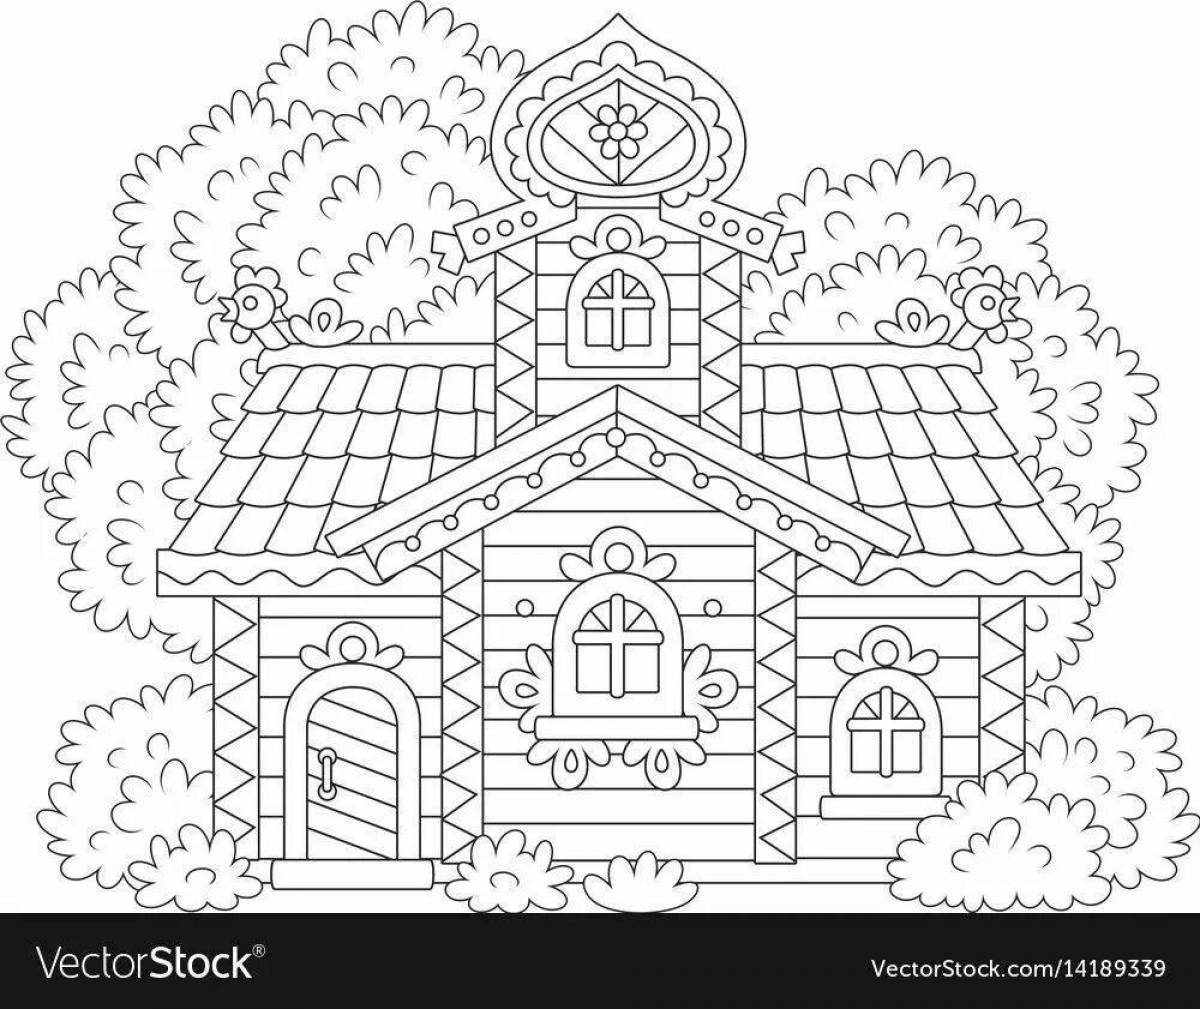 Coloring bright wooden hut